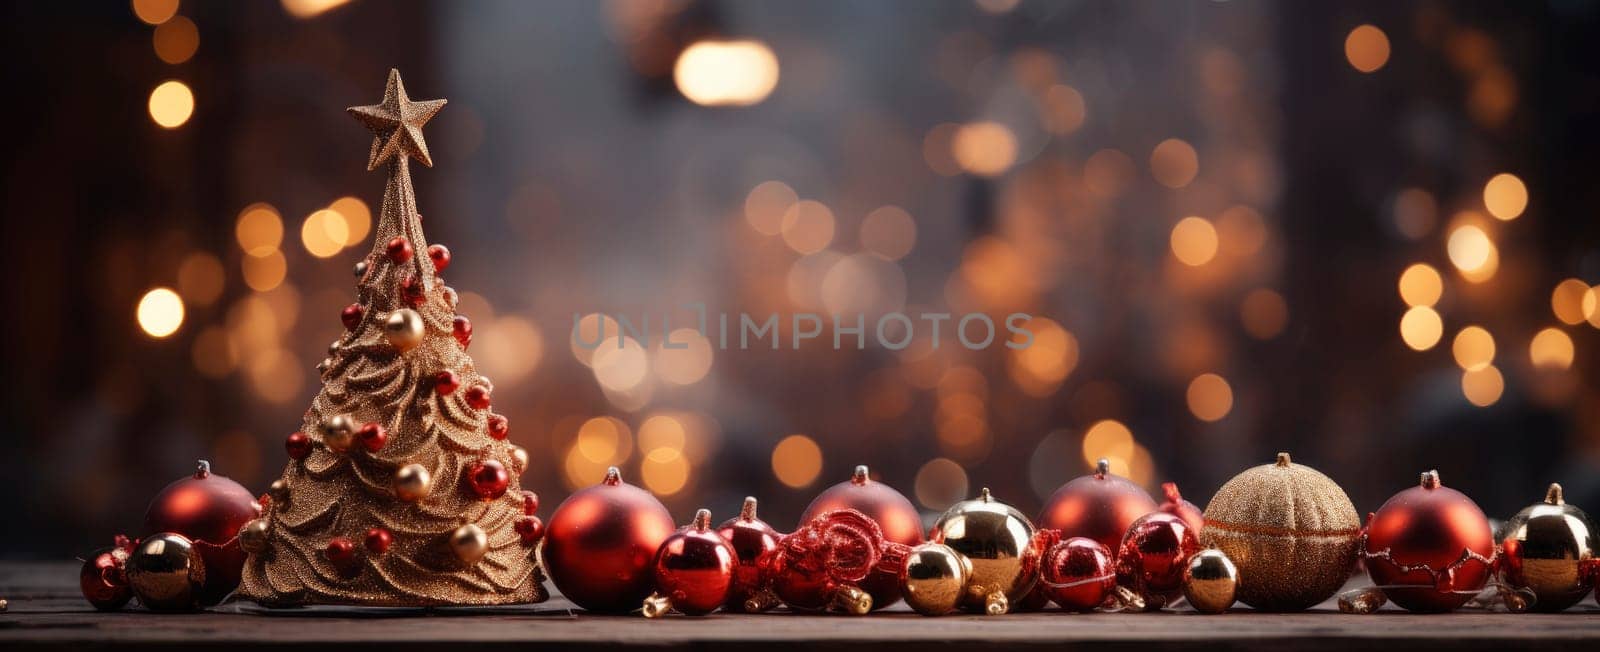 Decorated xmas table with Merry Christmas gifts in cozy Santa home interior, banner. Happy New Year presents boxes in workshop late in night with lights on xmas tree, holiday eve background. by jbruiz78